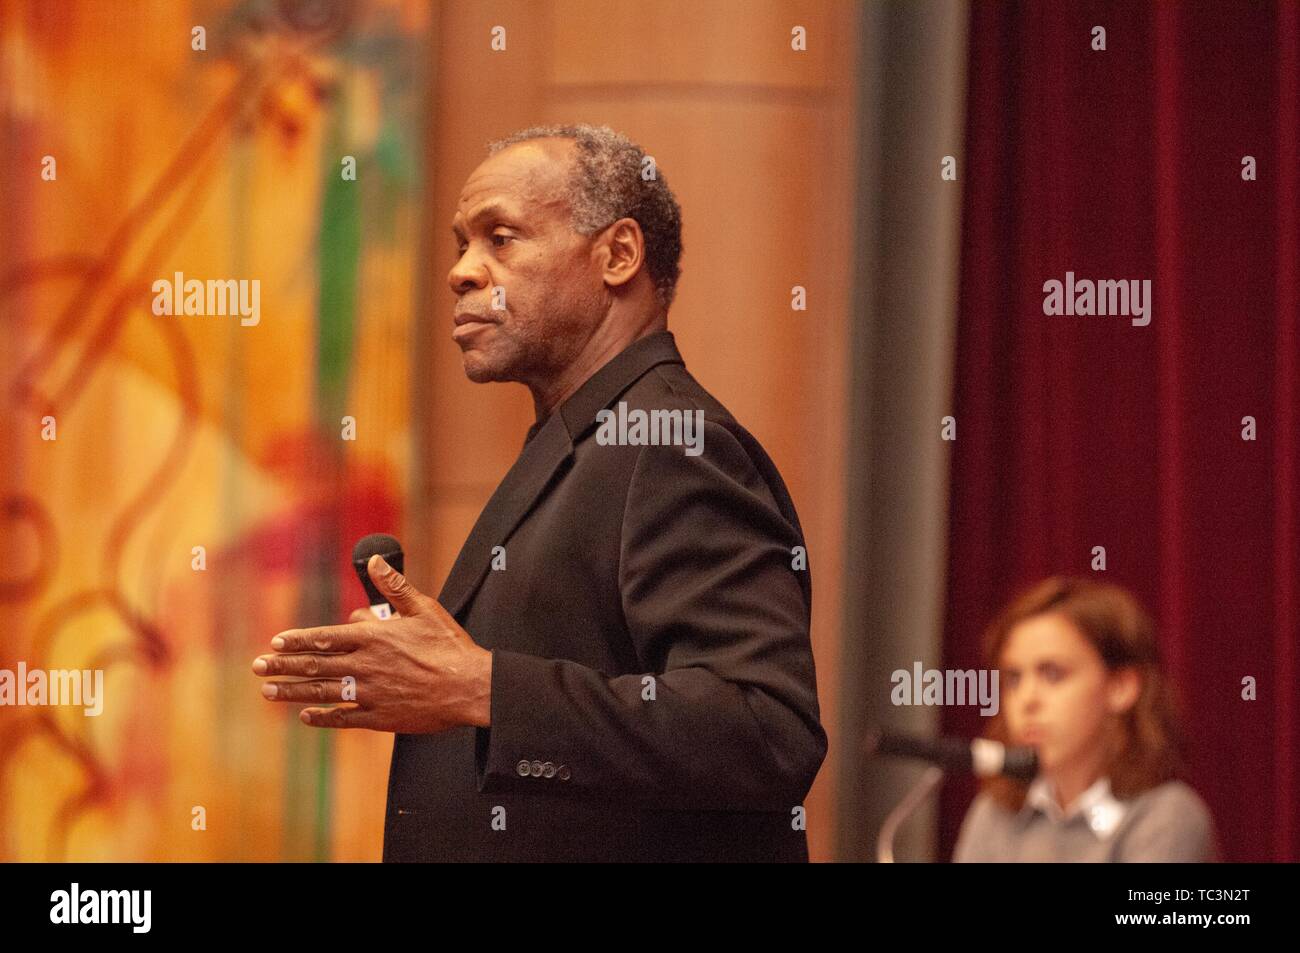 American actor Danny Glover gestures as he speaks at the Johns Hopkins University in Baltimore, Maryland, October 12, 2007. From the Homewood Photography collection. () Stock Photo